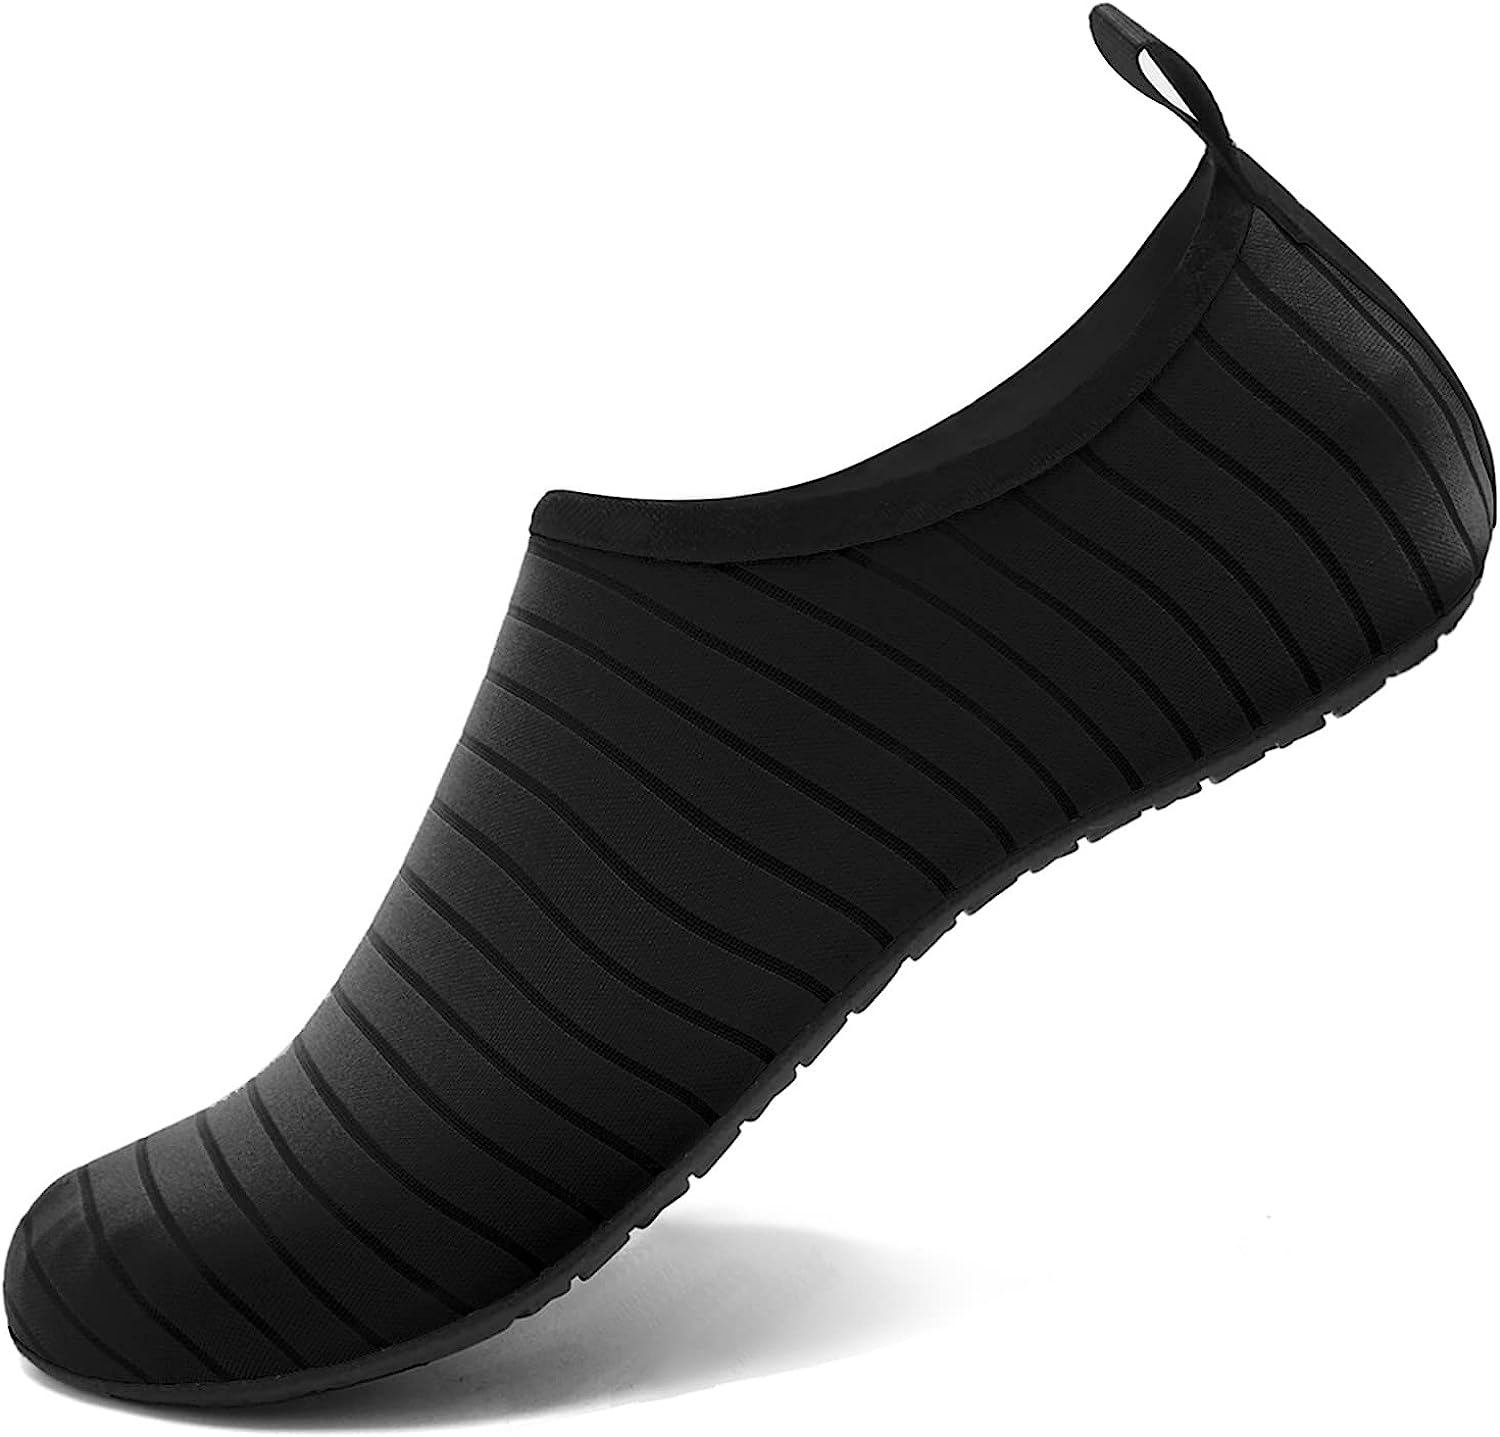 shoes for kayaking product comparison